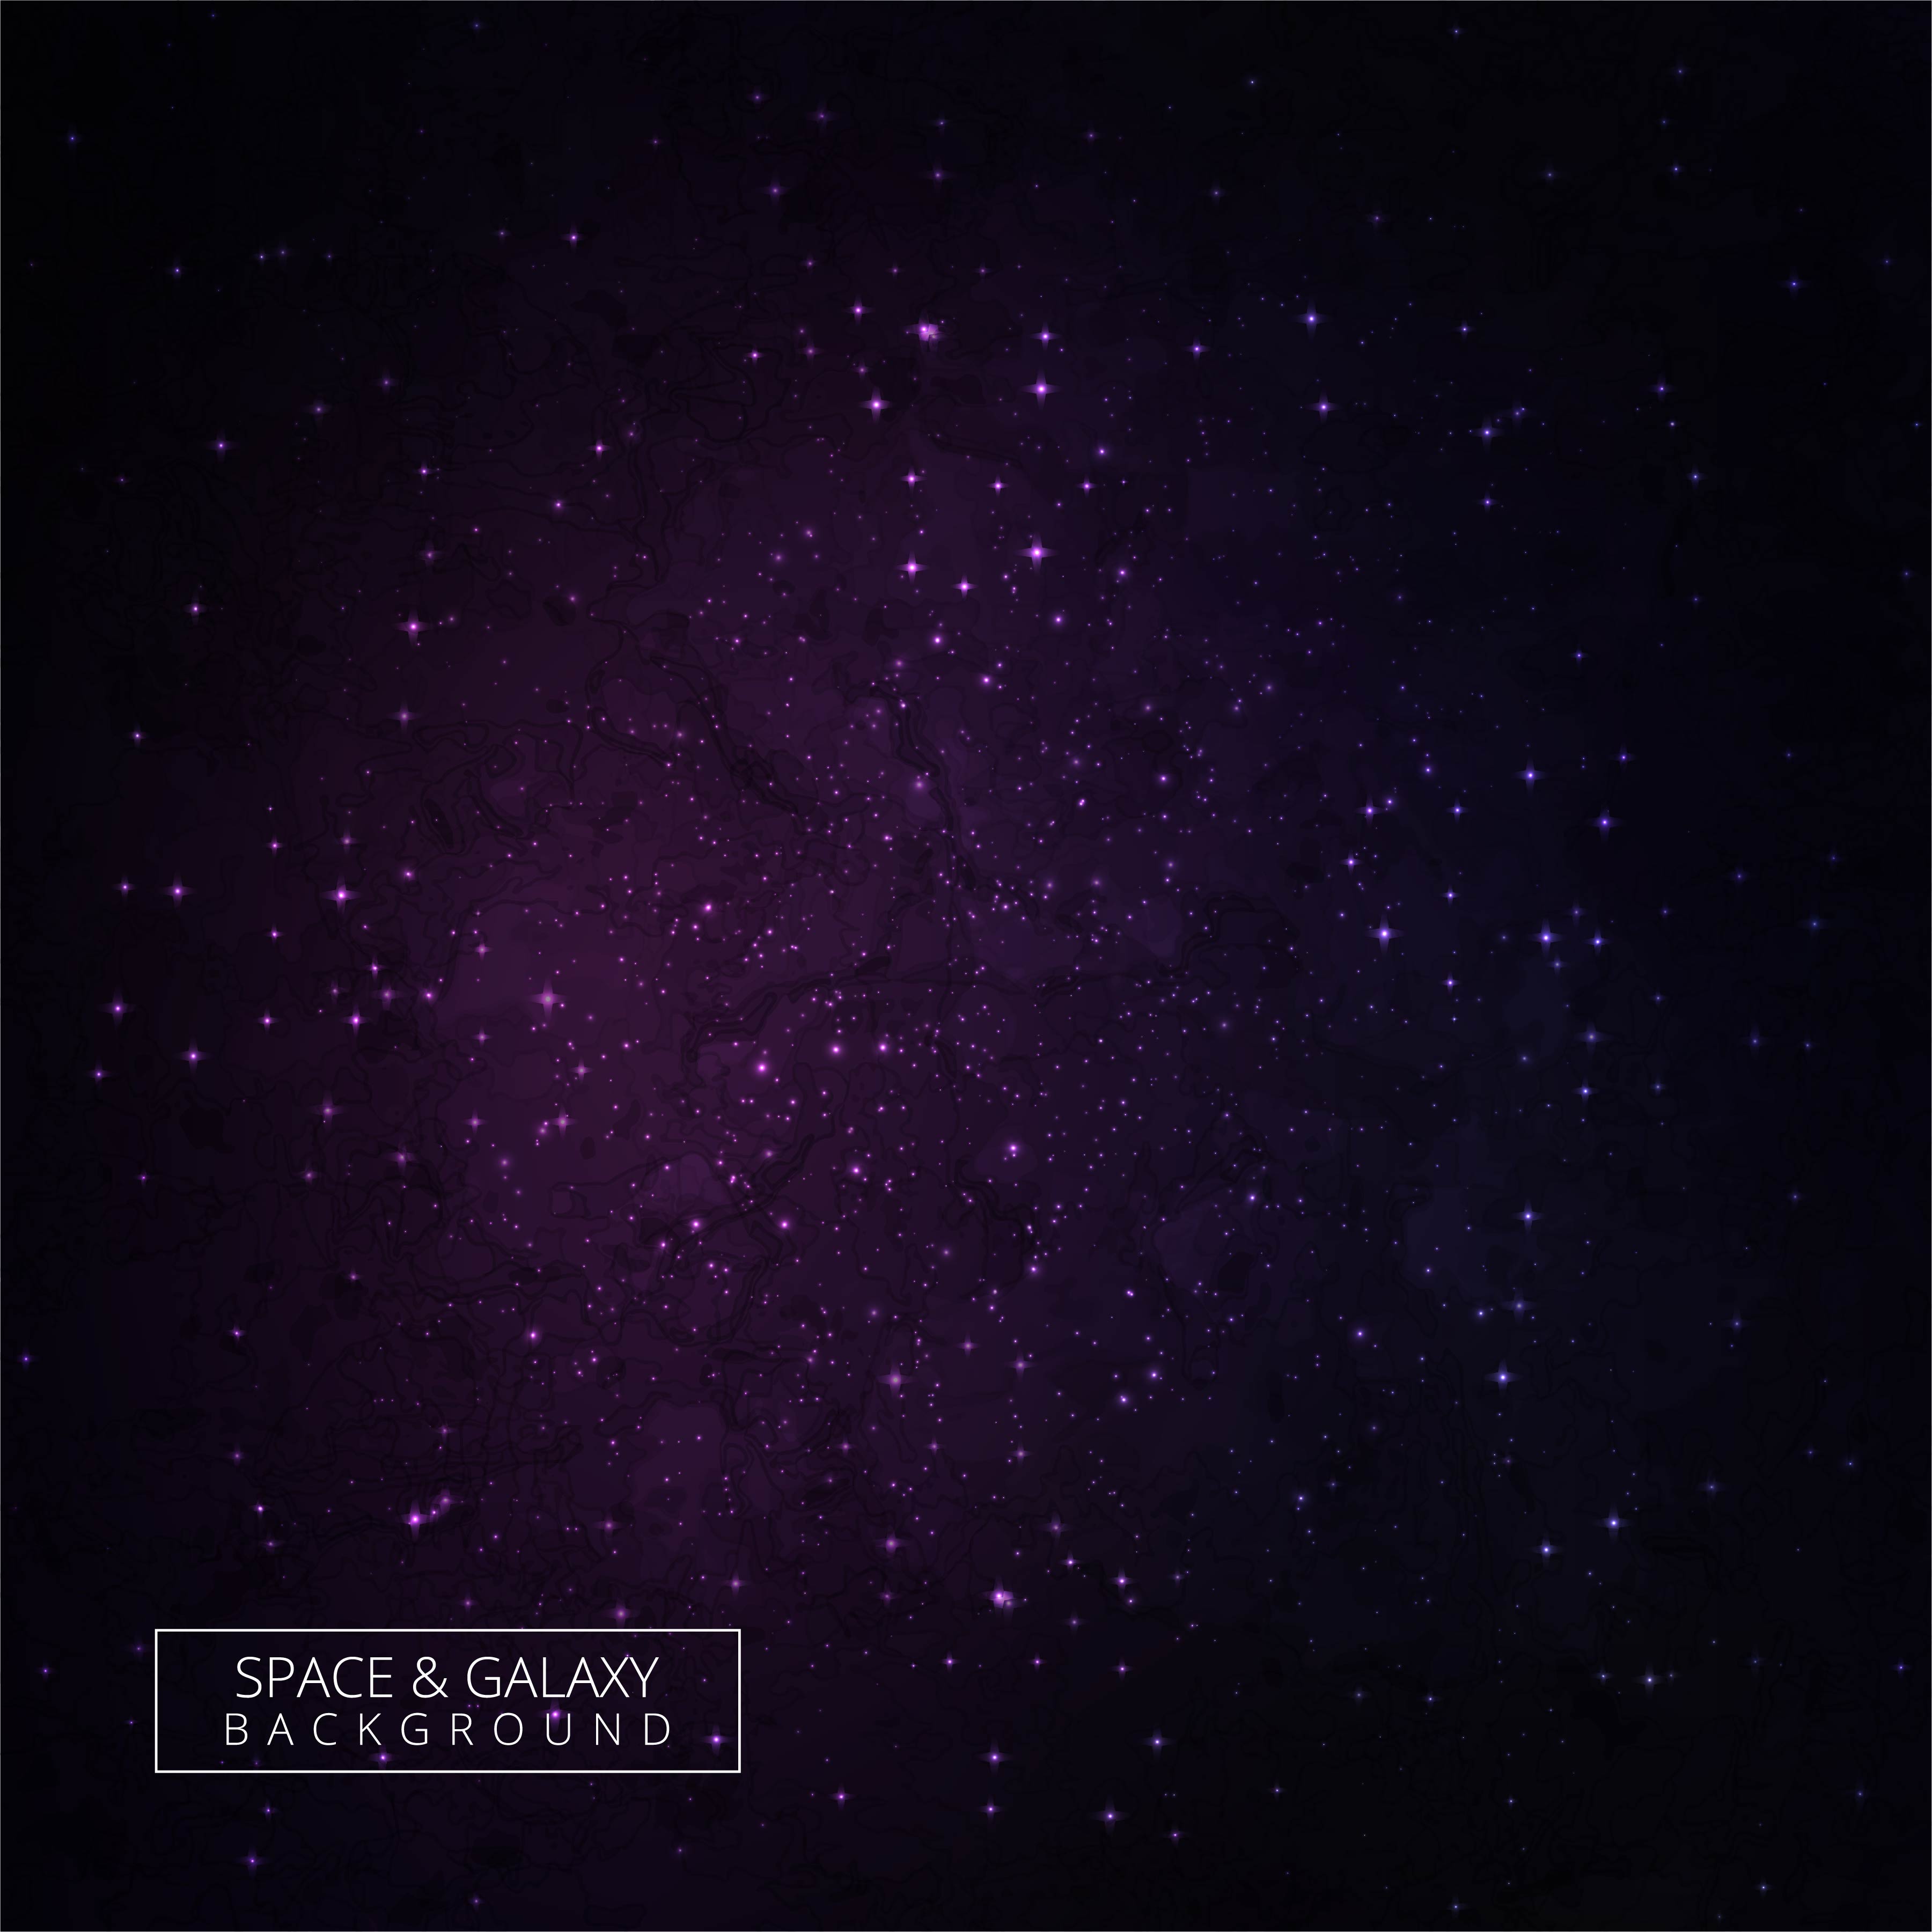 Vector Cosmos Illustration With Stars And Galaxy Dark Background